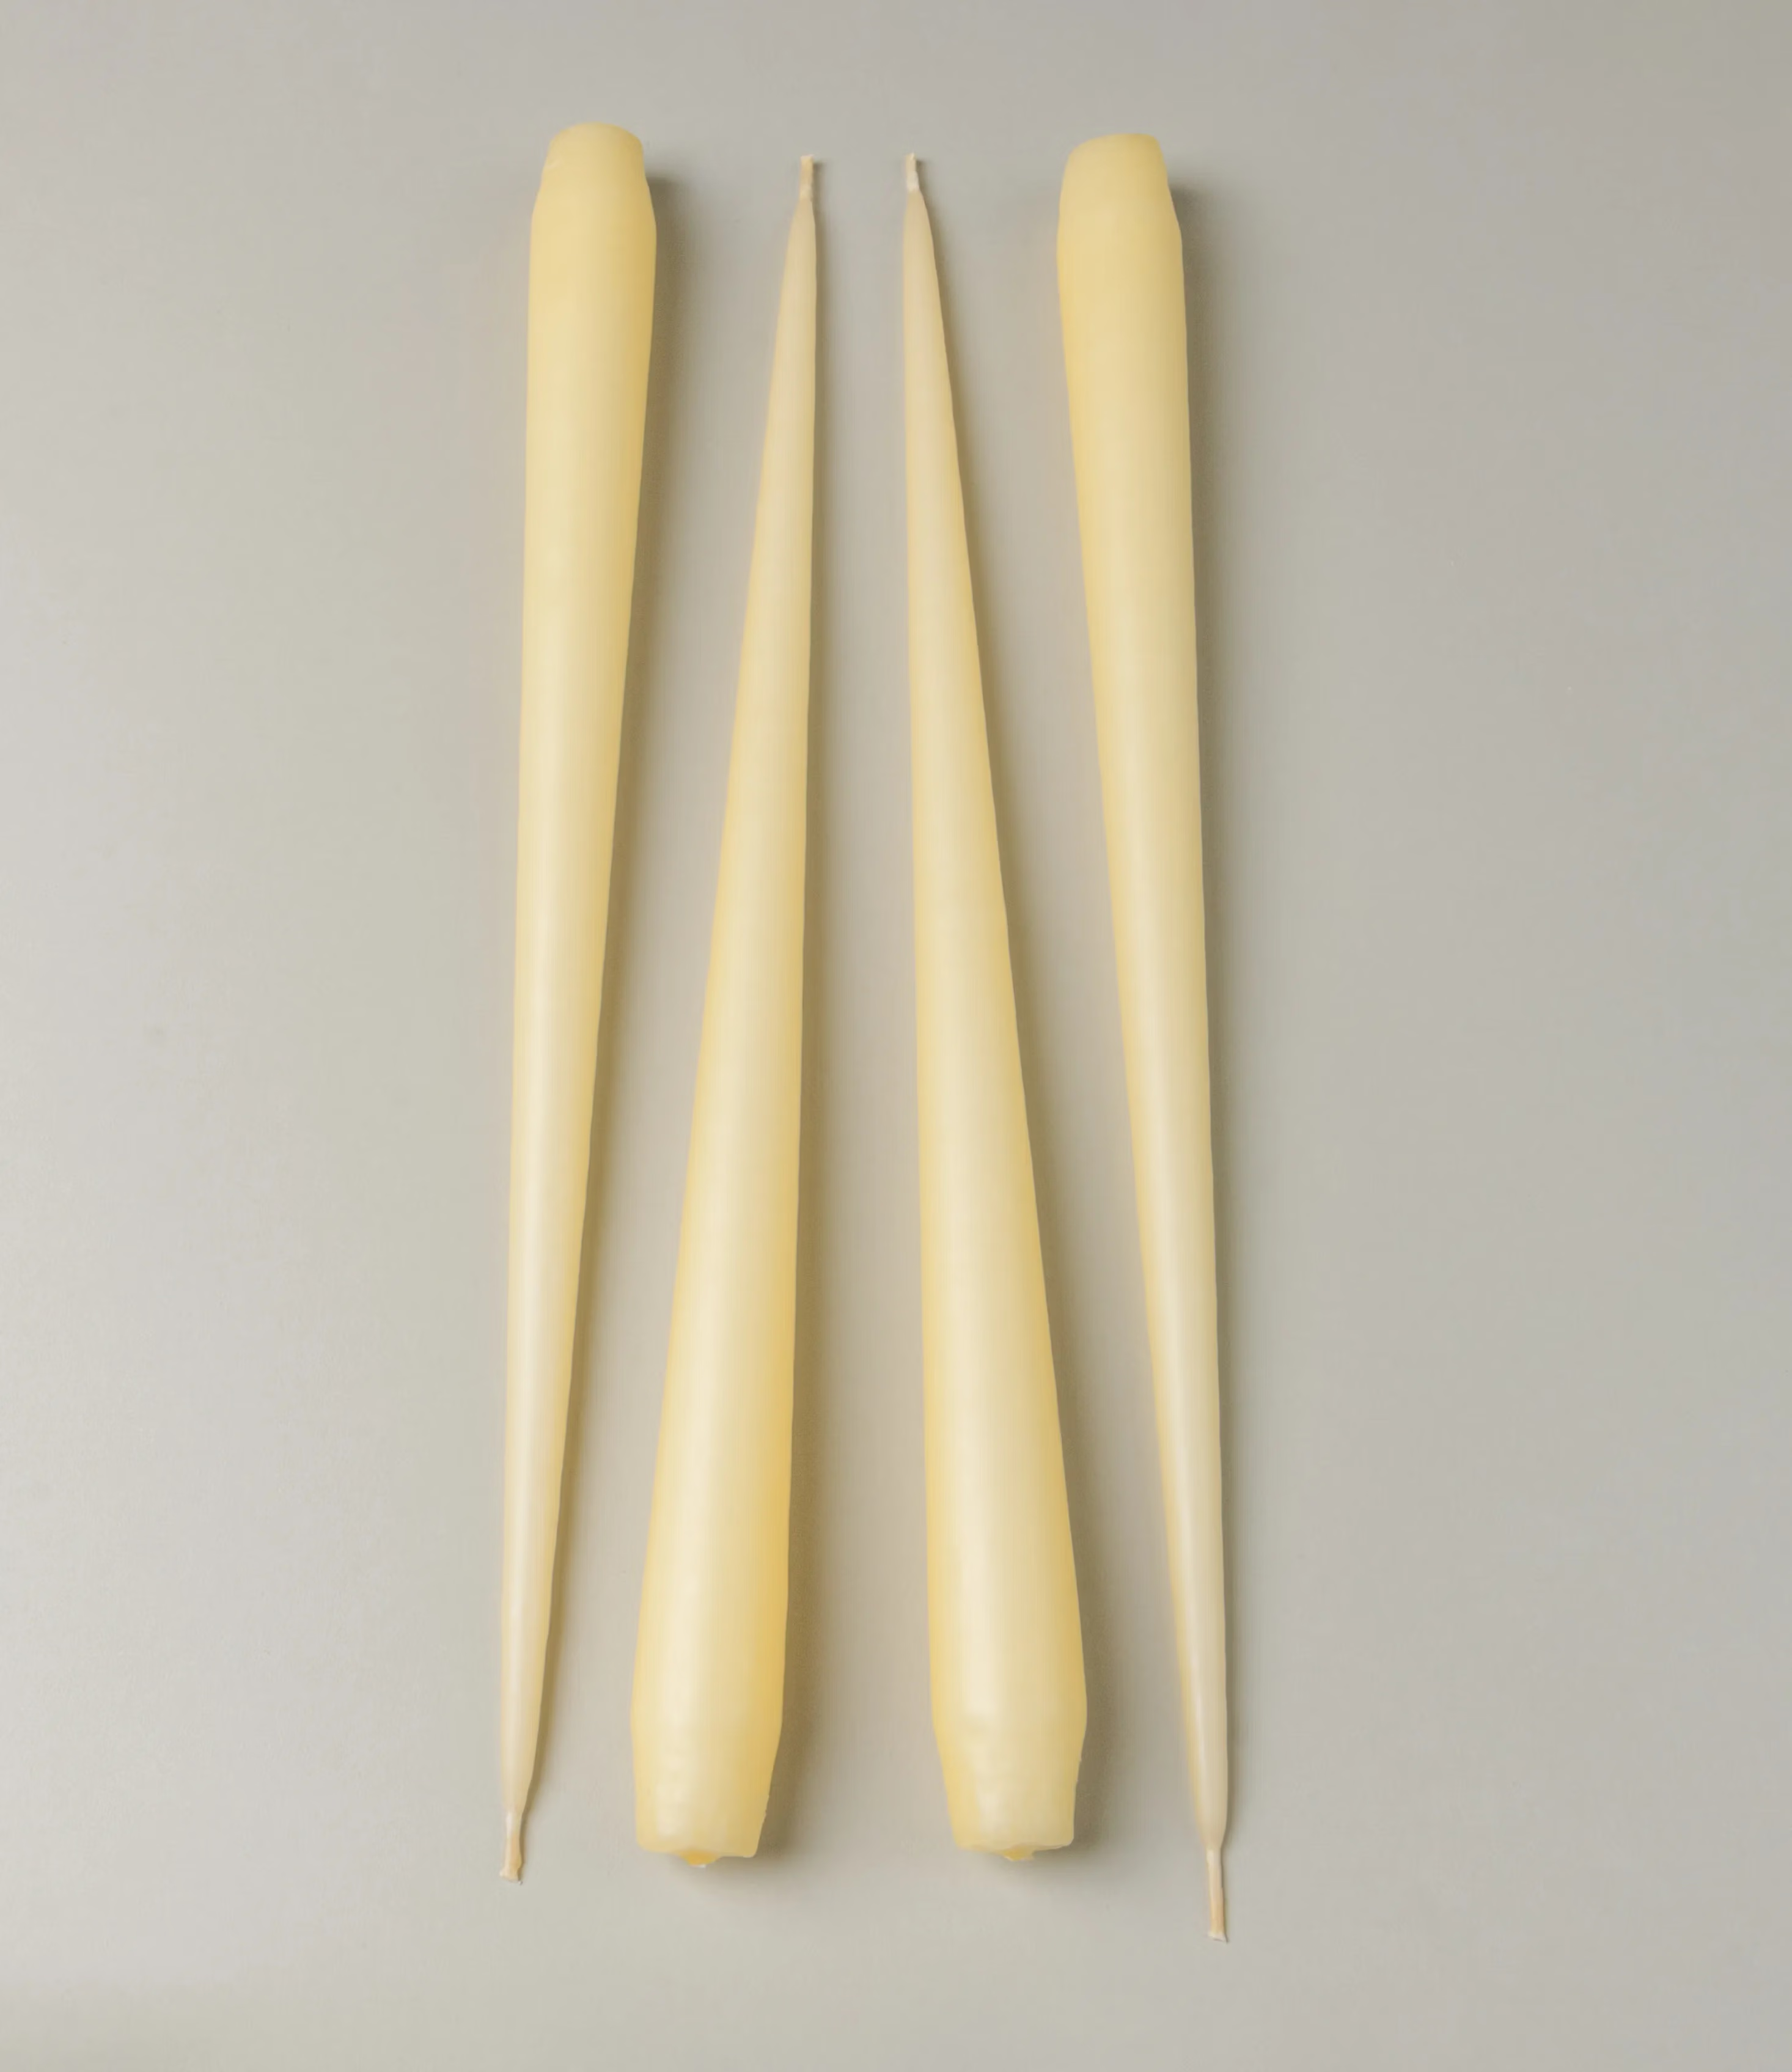 Ester&Erik Taper Candle coming in a Buttermilk shade. The package contains 4 taper candles of the same shade